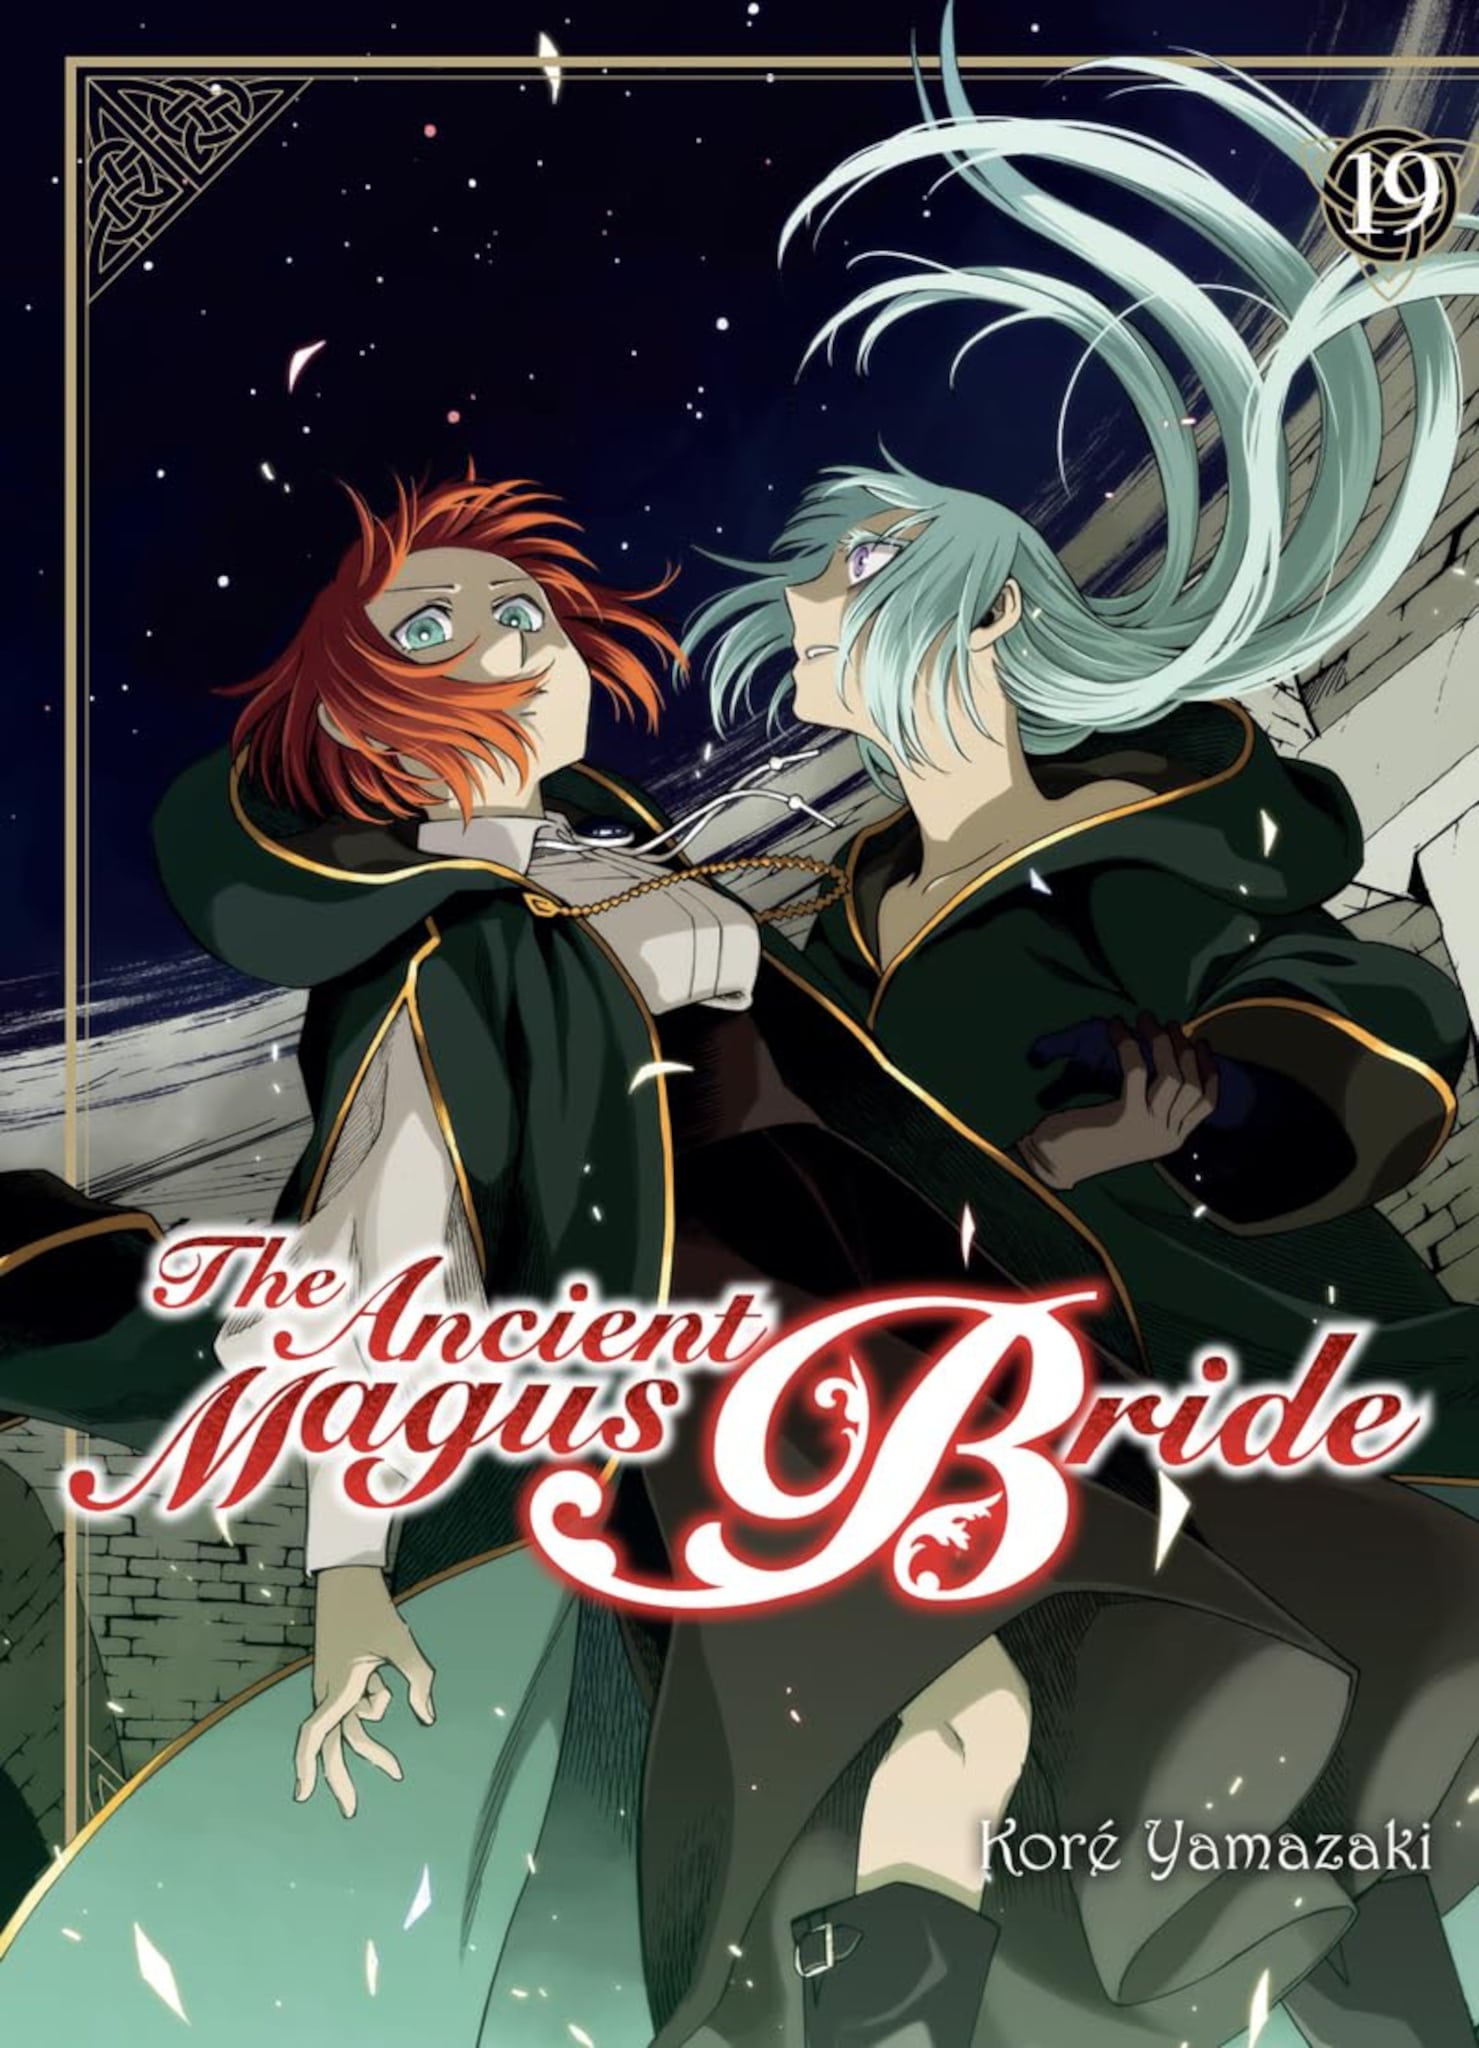 Tome 19 du manga The Ancient Magus Bride